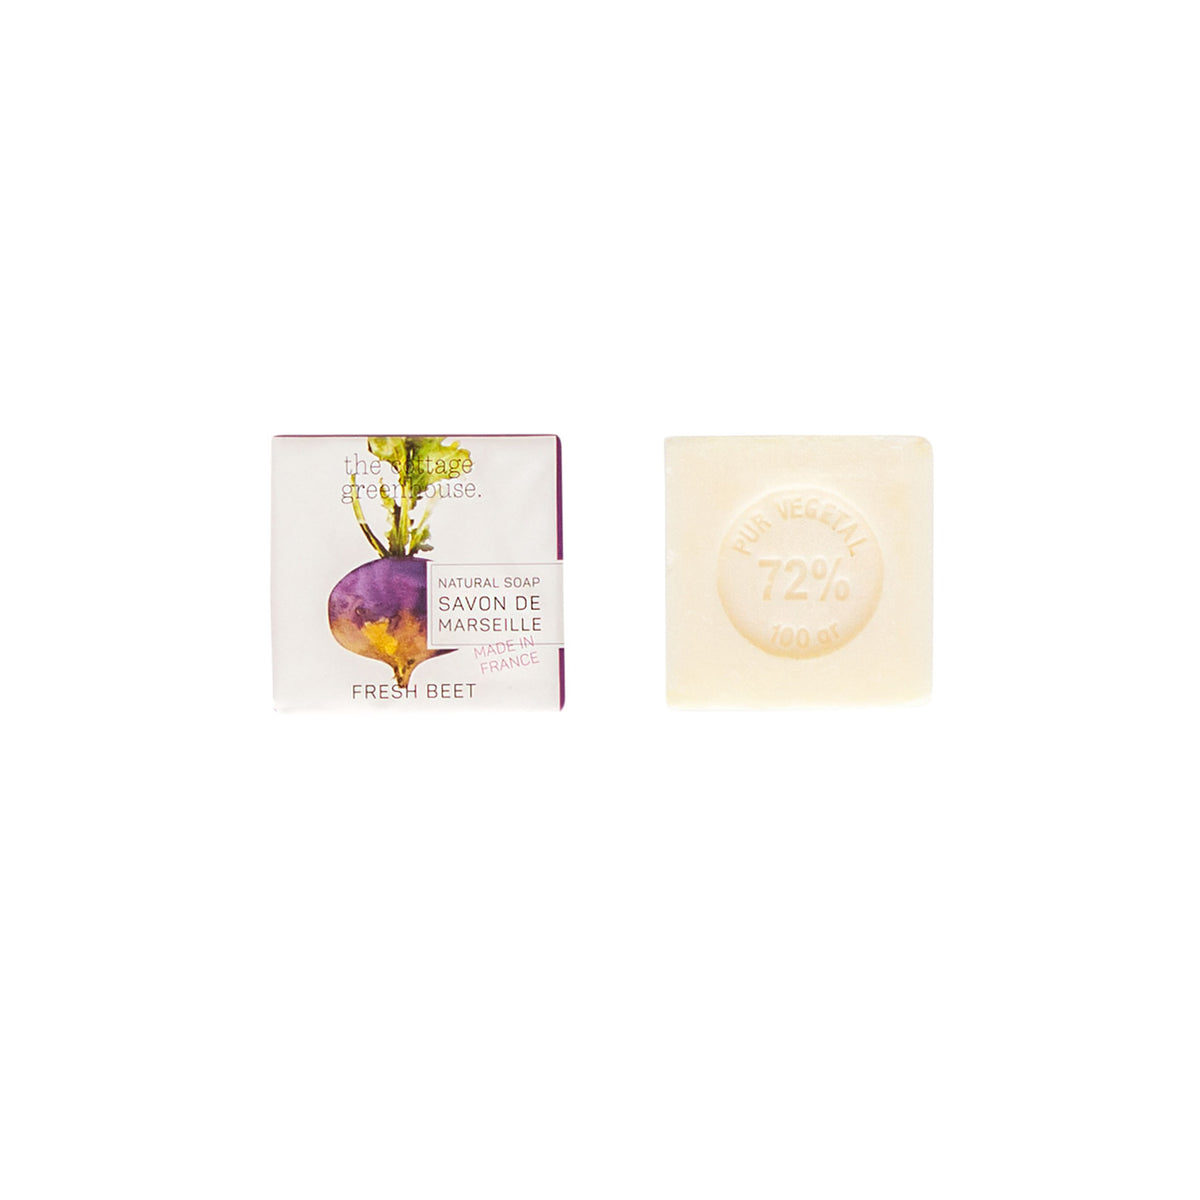 A bar of The Cottage Greenhouse Fresh Beet Soap labeled "fresh beet" with an illustration of beets on its packaging next to a translucent yellow Shea Butter soap bar. Brand Name: Margot Elena